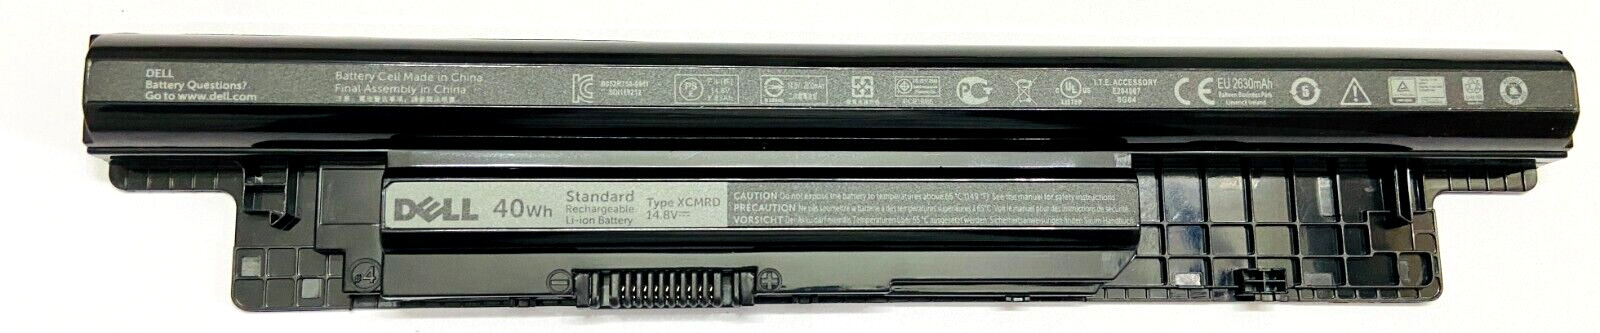 Genuine XCMRD Battery For Inspiron 15 3000 Series 15 3521 3537 3531 3542 40WH